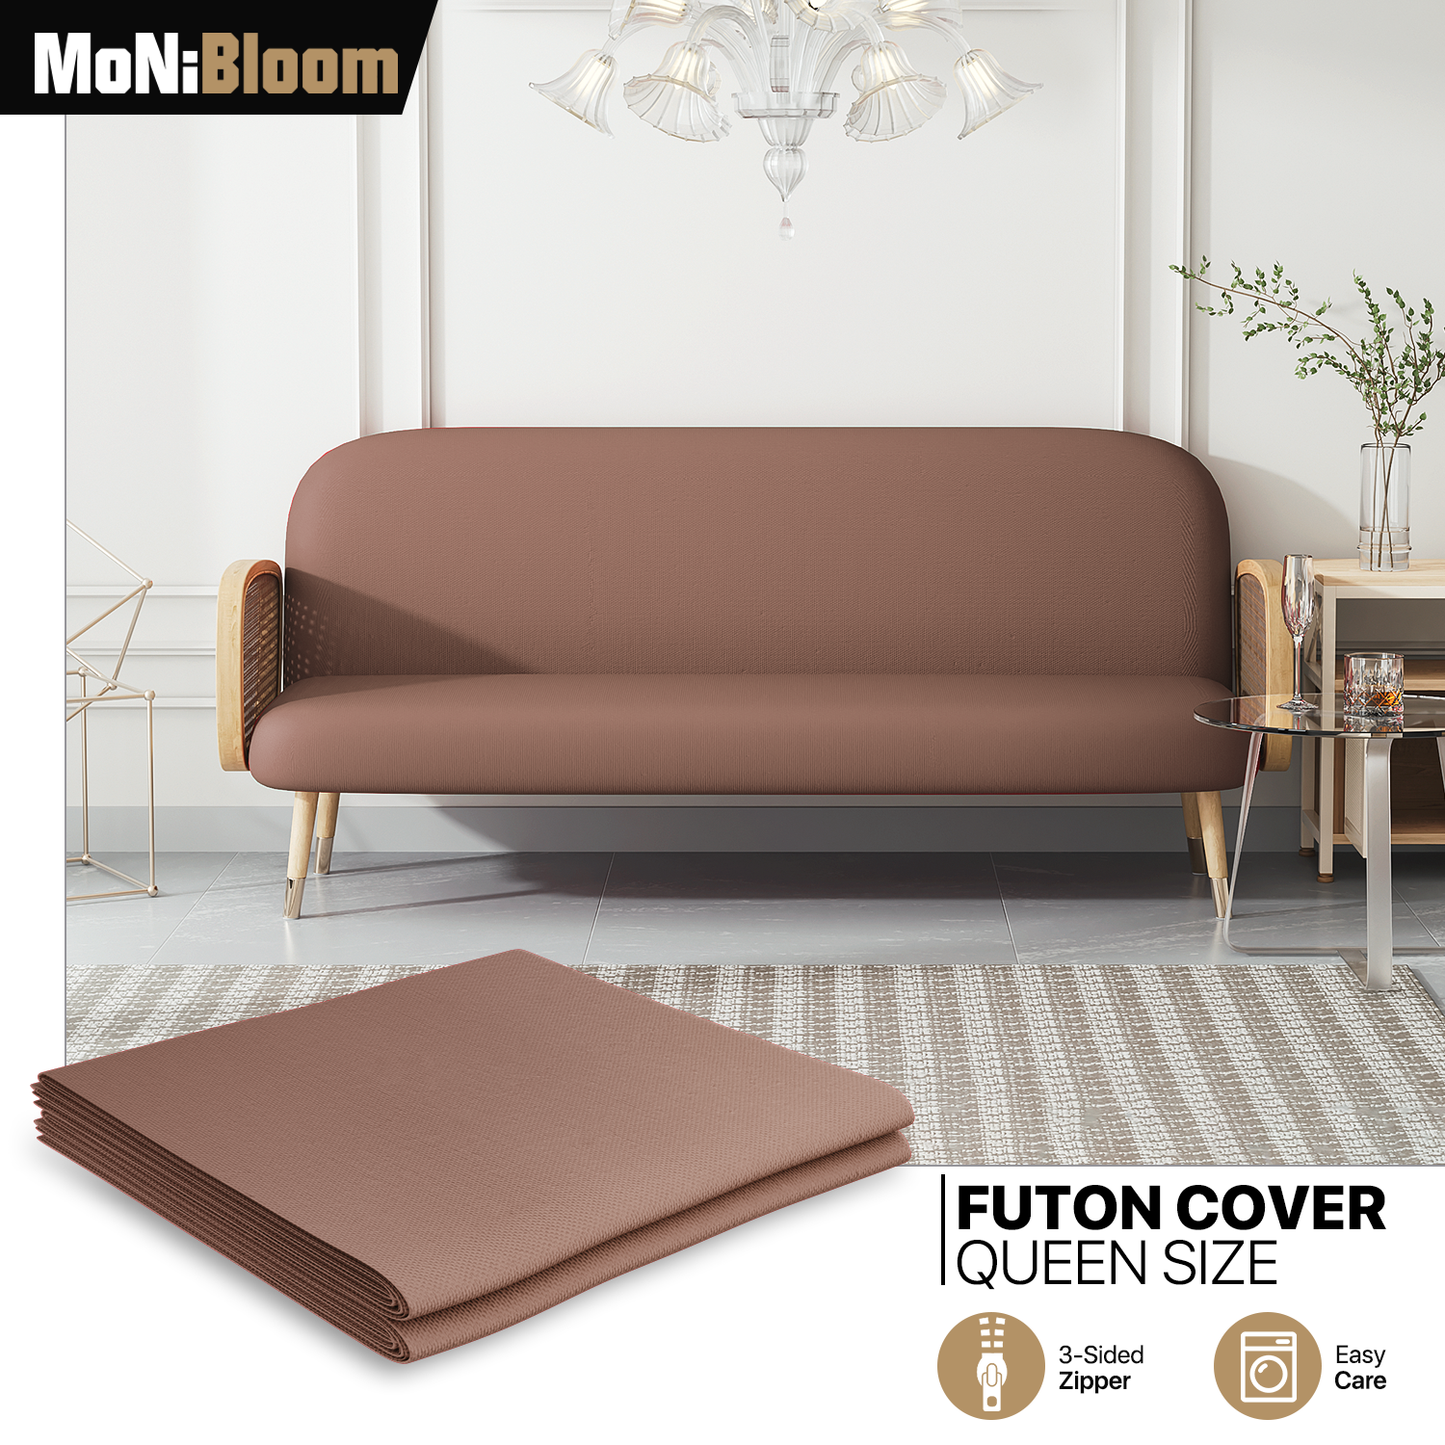 Futon Cover - Polyester - Queen Size 60"x80"x2"